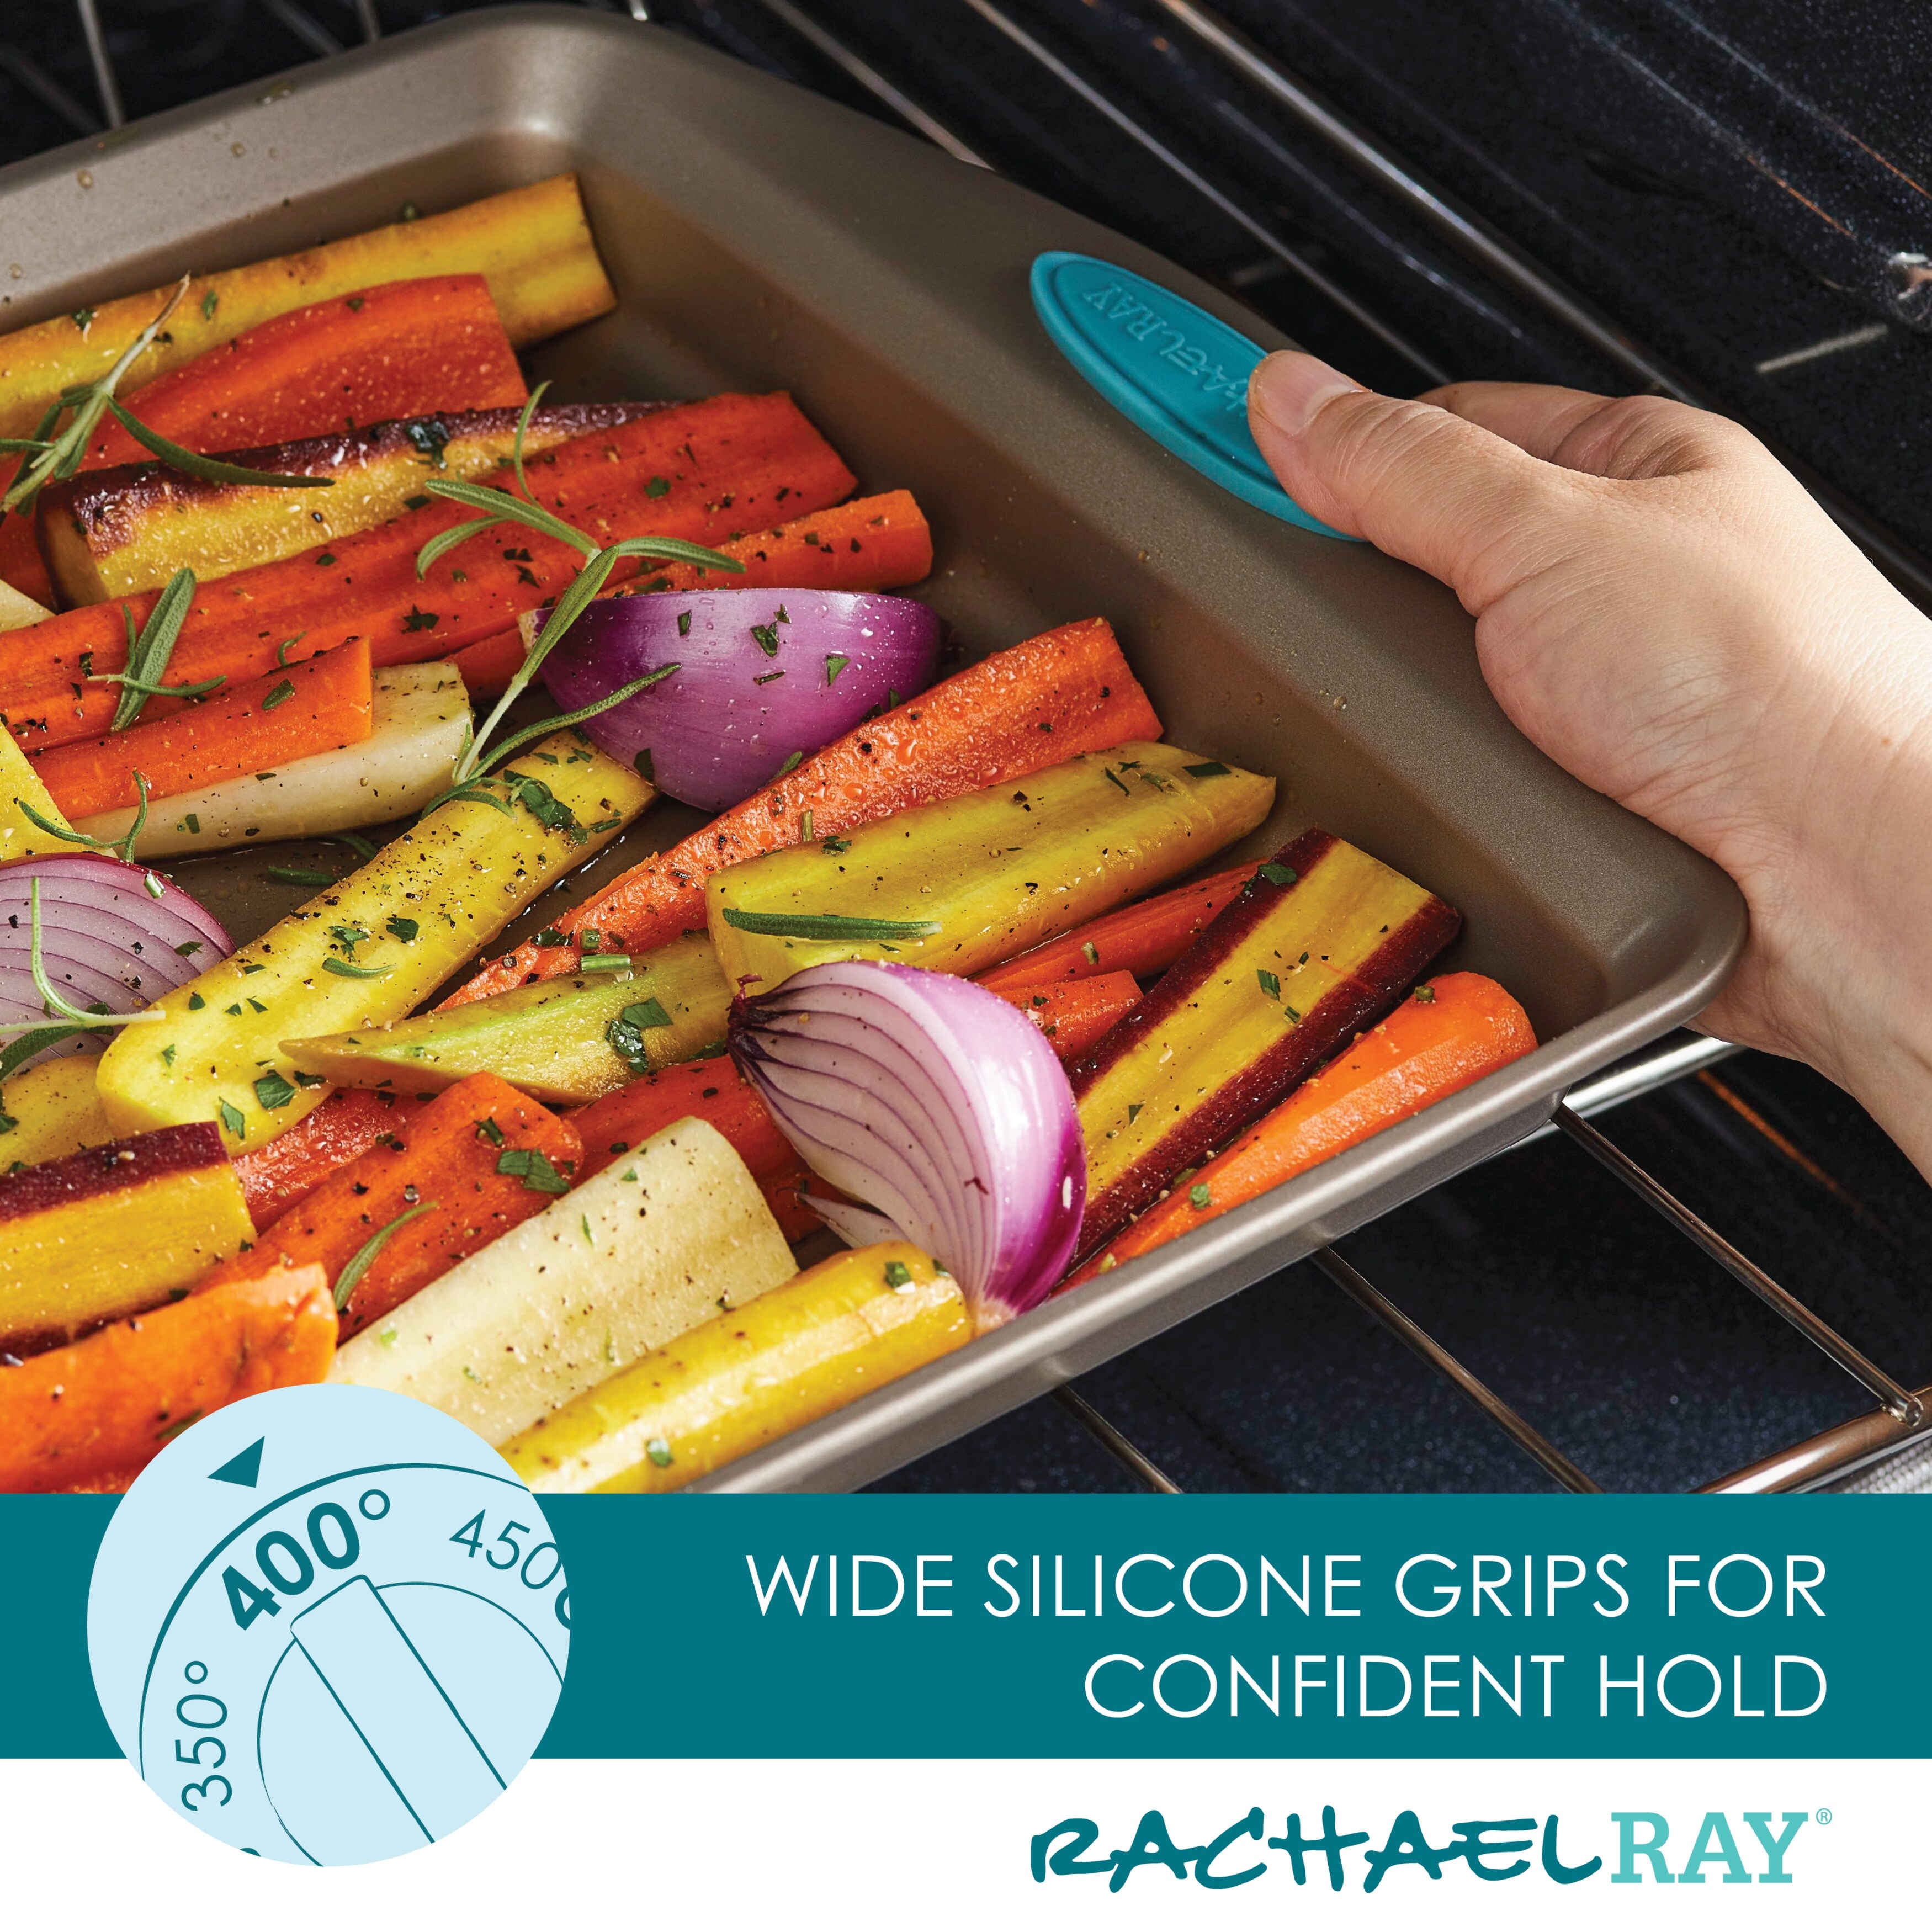 https://ak1.ostkcdn.com/images/products/is/images/direct/00d230709b13d11fab3f6cf4a6a48ace39ed63d9/Rachael-Ray-Nonstick-Loaf-Pan-and-Sheet-Pan-Set%2C-2-Piece.jpg